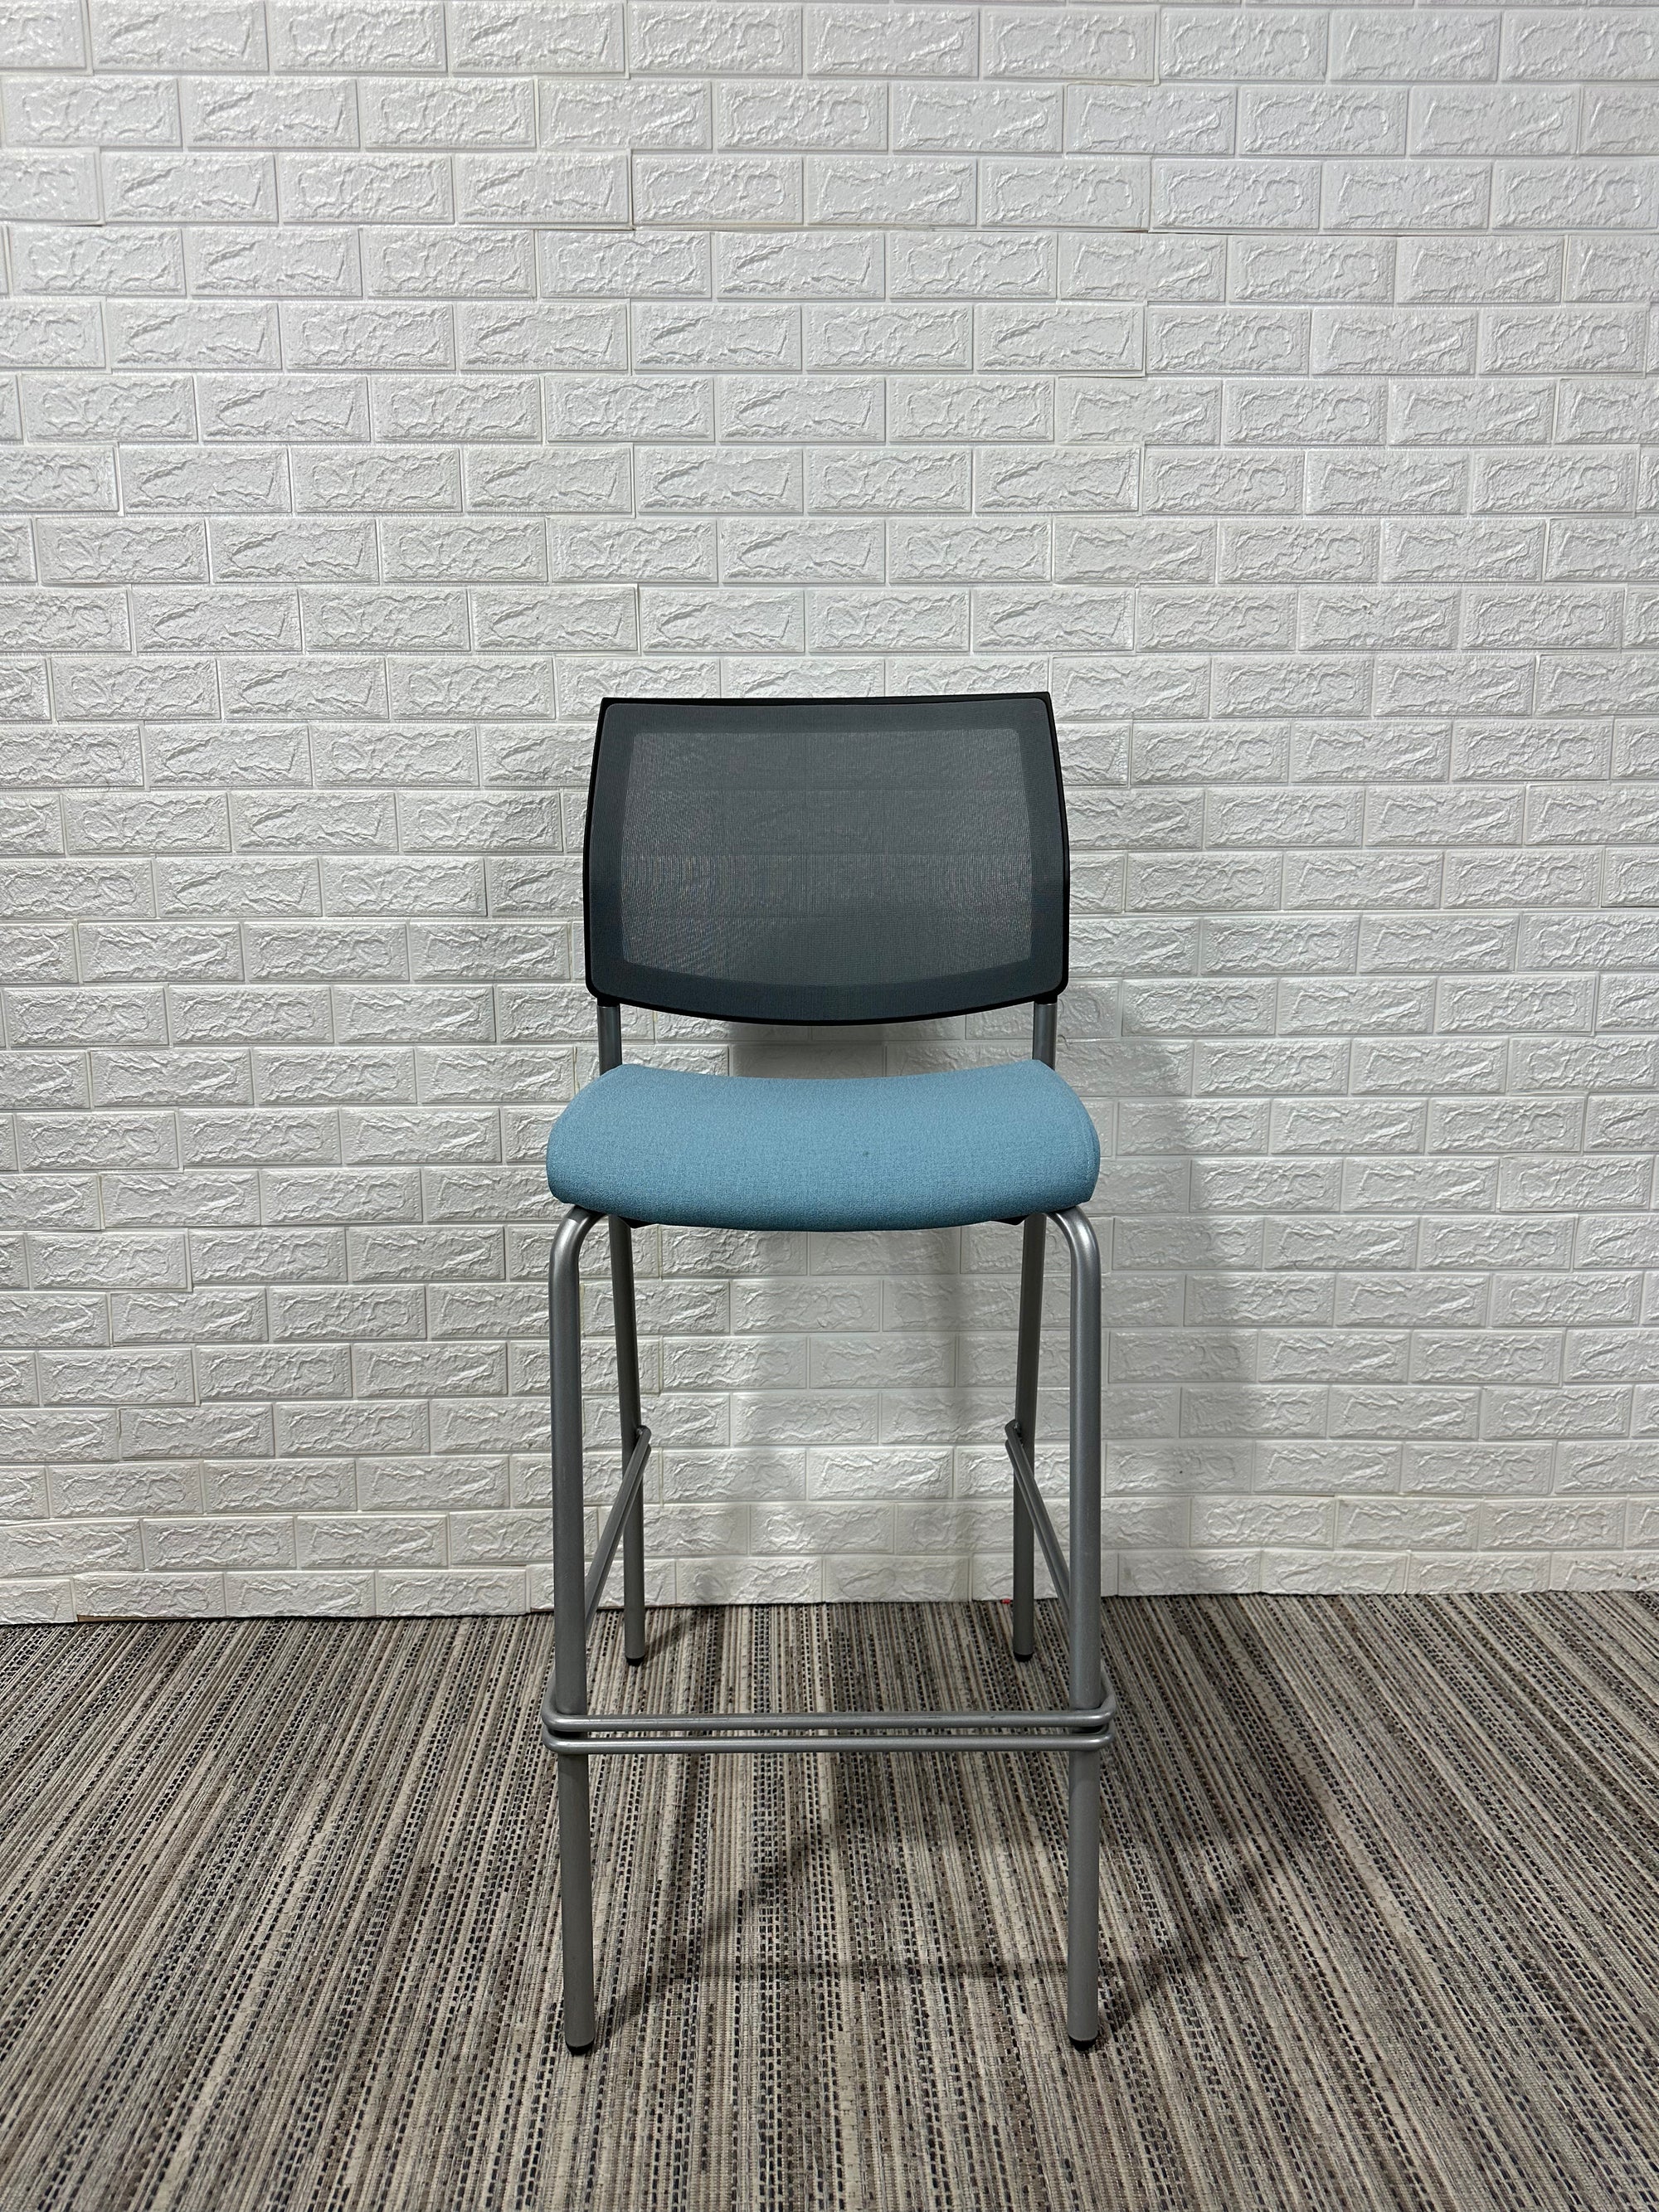 Pre-Owned Blue High Chair - Duckys Office Furniture